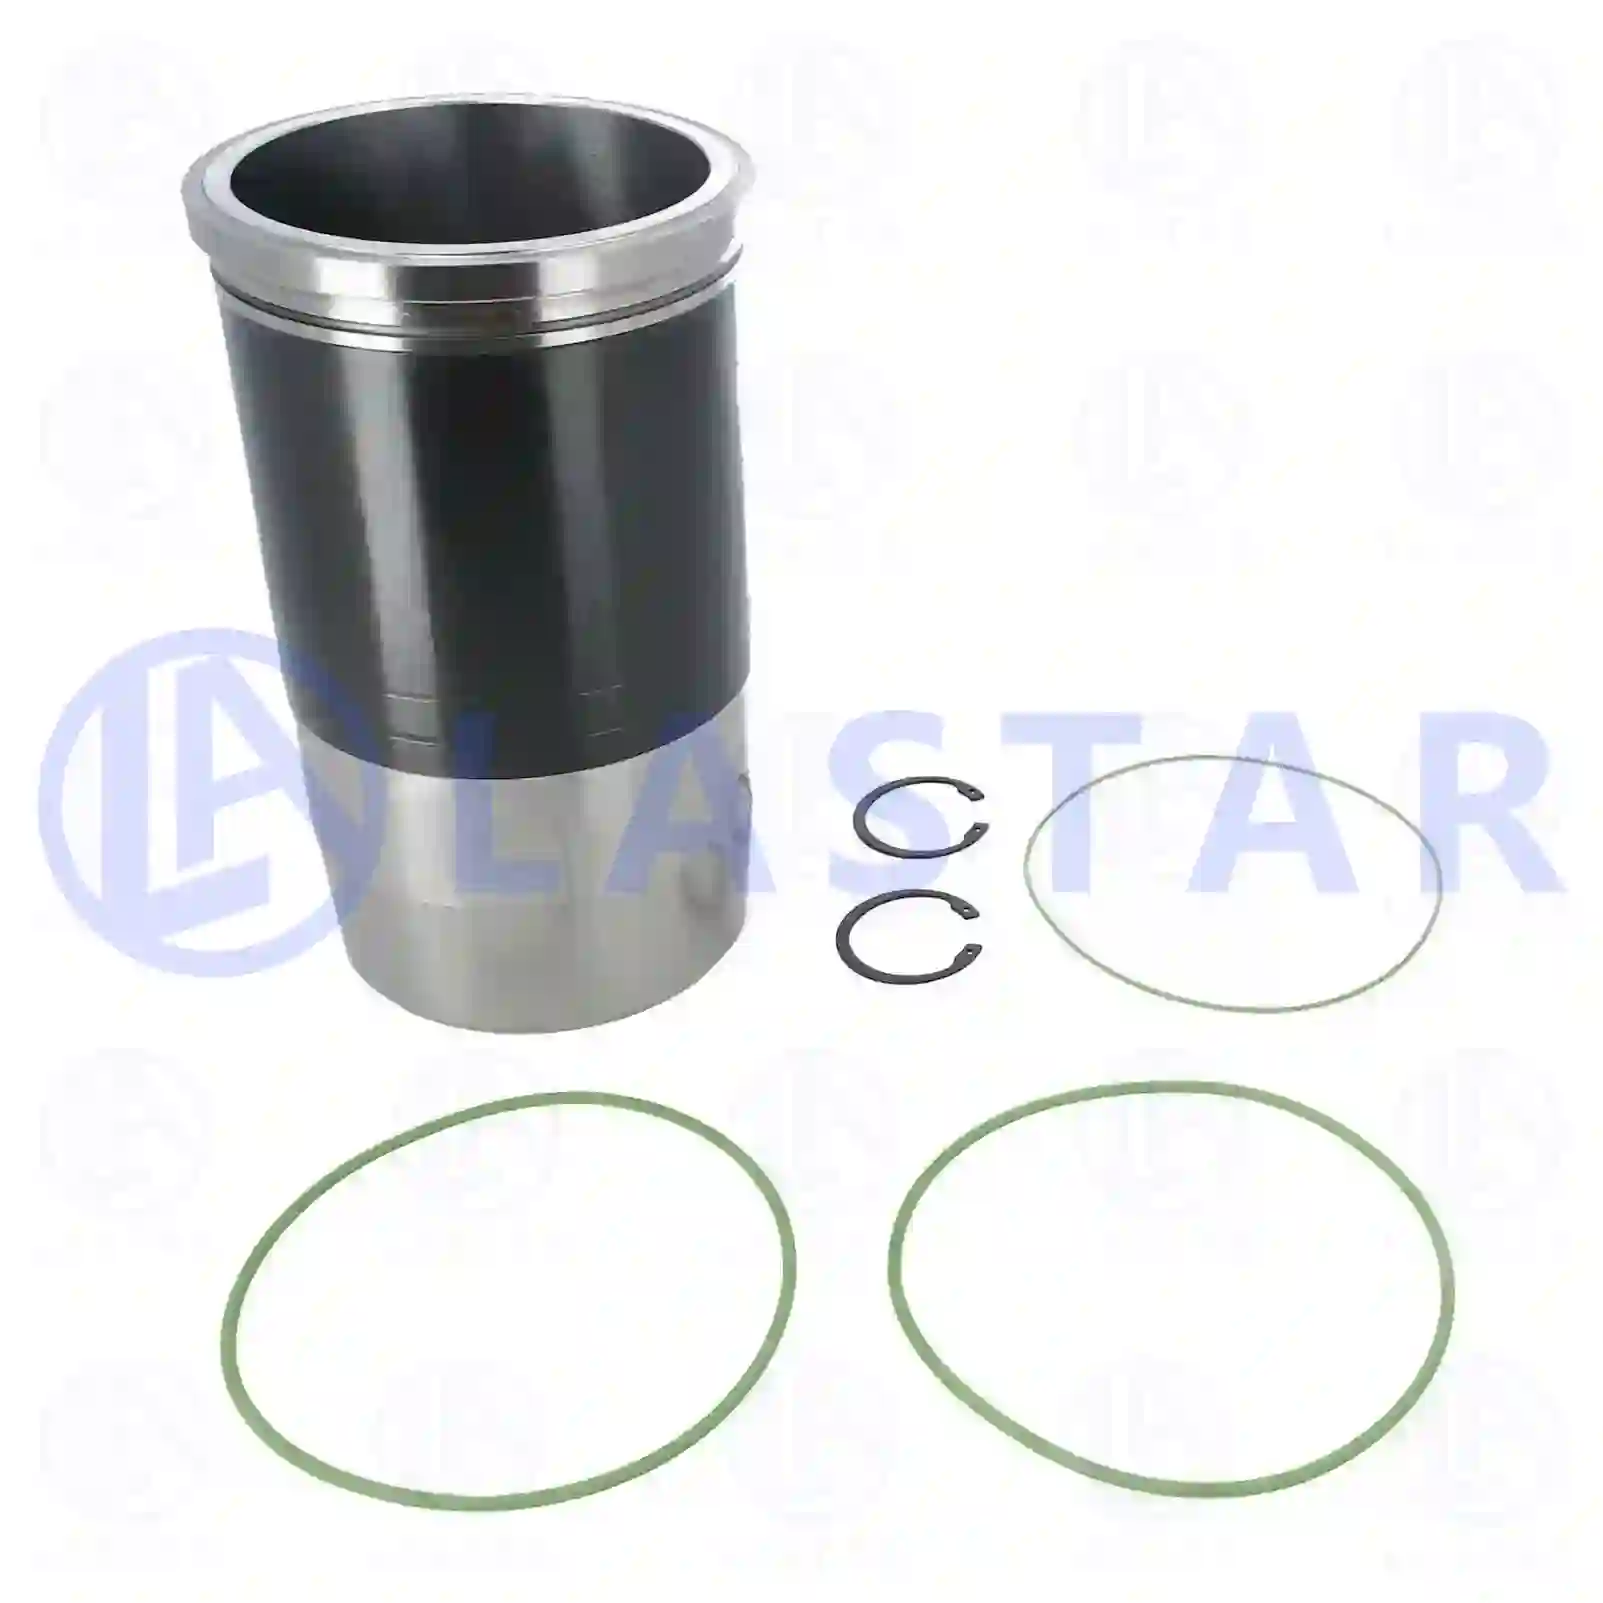 Piston with liner, 77702602, 4420300537, 4420301337, 4420302337, 4420302437 ||  77702602 Lastar Spare Part | Truck Spare Parts, Auotomotive Spare Parts Piston with liner, 77702602, 4420300537, 4420301337, 4420302337, 4420302437 ||  77702602 Lastar Spare Part | Truck Spare Parts, Auotomotive Spare Parts